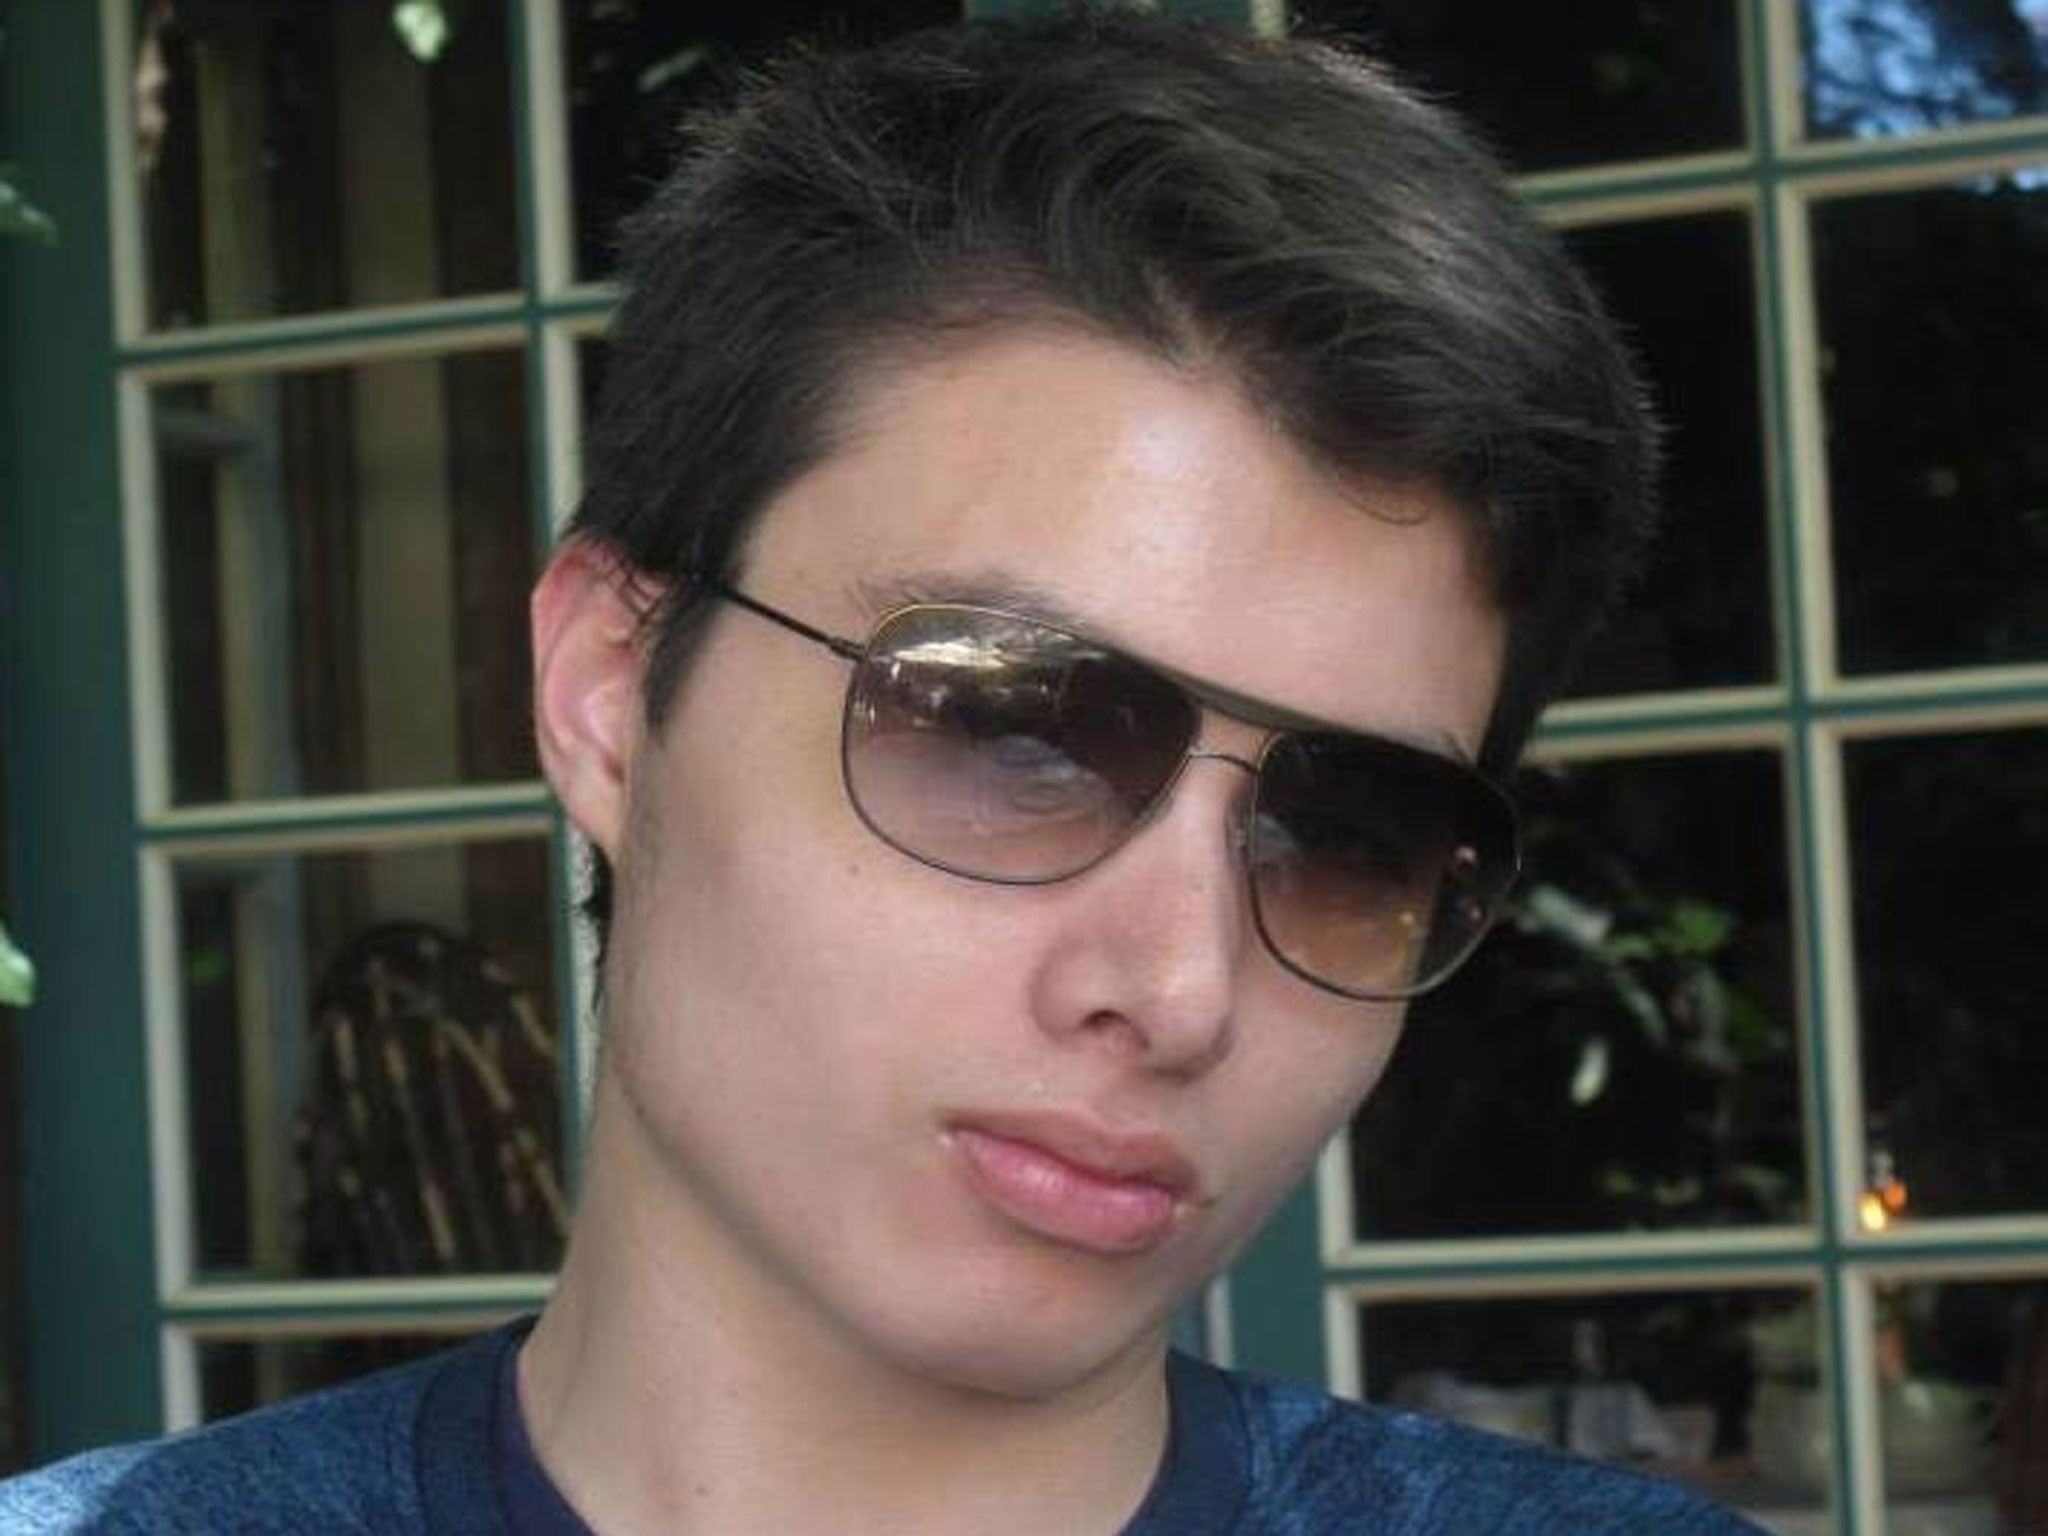 The 22-year-old mass-murderer Elliot Rodger posted details of what he planned to do in video posts and a 141-page manifesto online